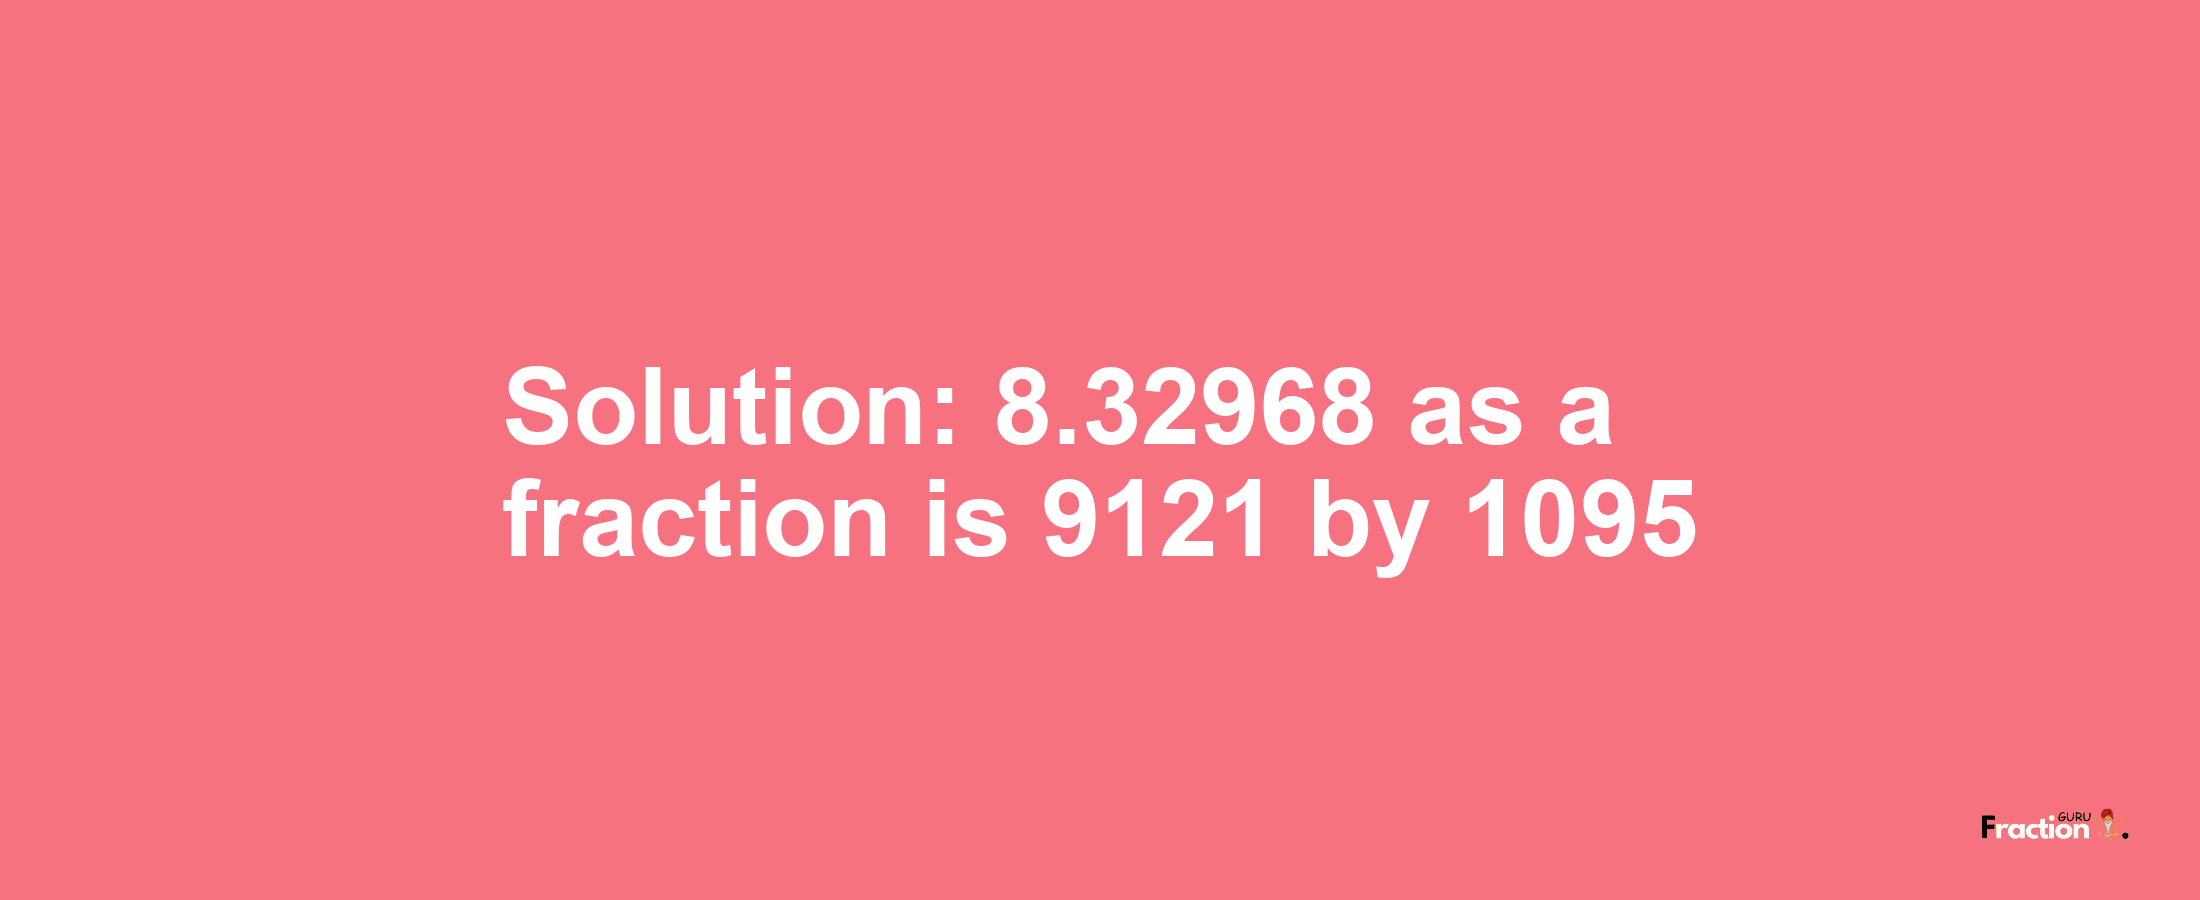 Solution:8.32968 as a fraction is 9121/1095